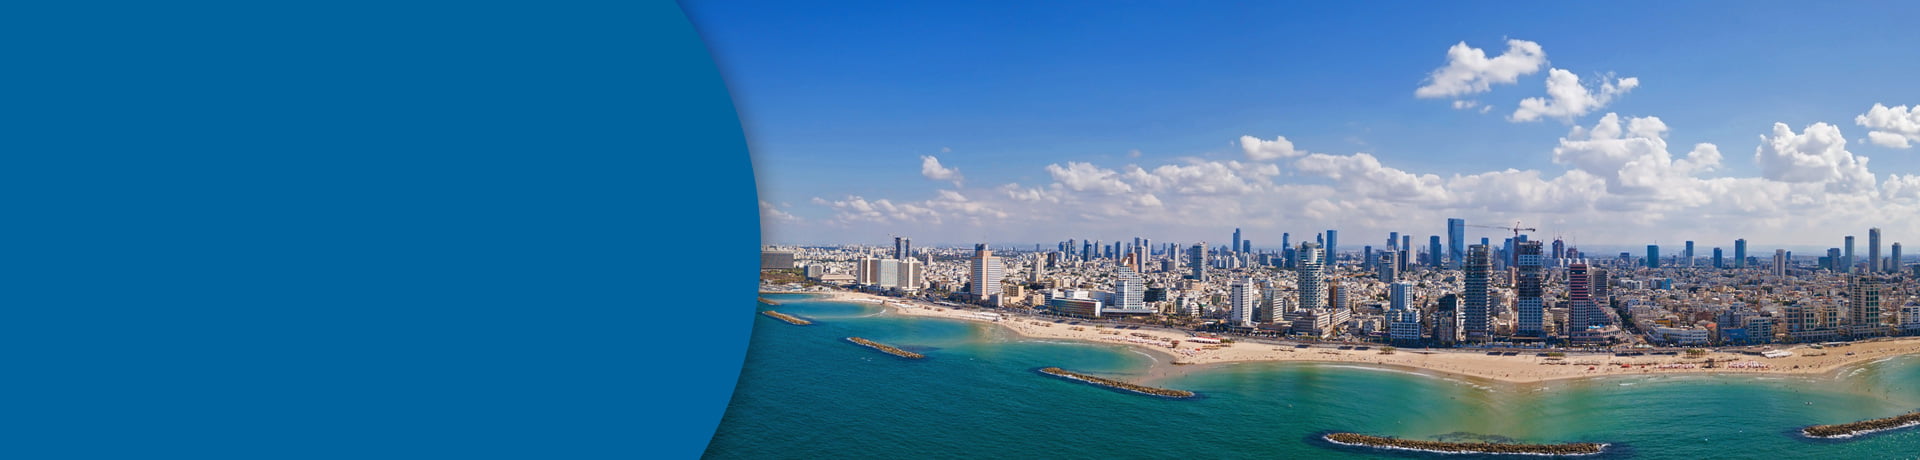 The easy way to connect in Israel
Israel's fastest cellular network Free use of selected apps minutes & texts